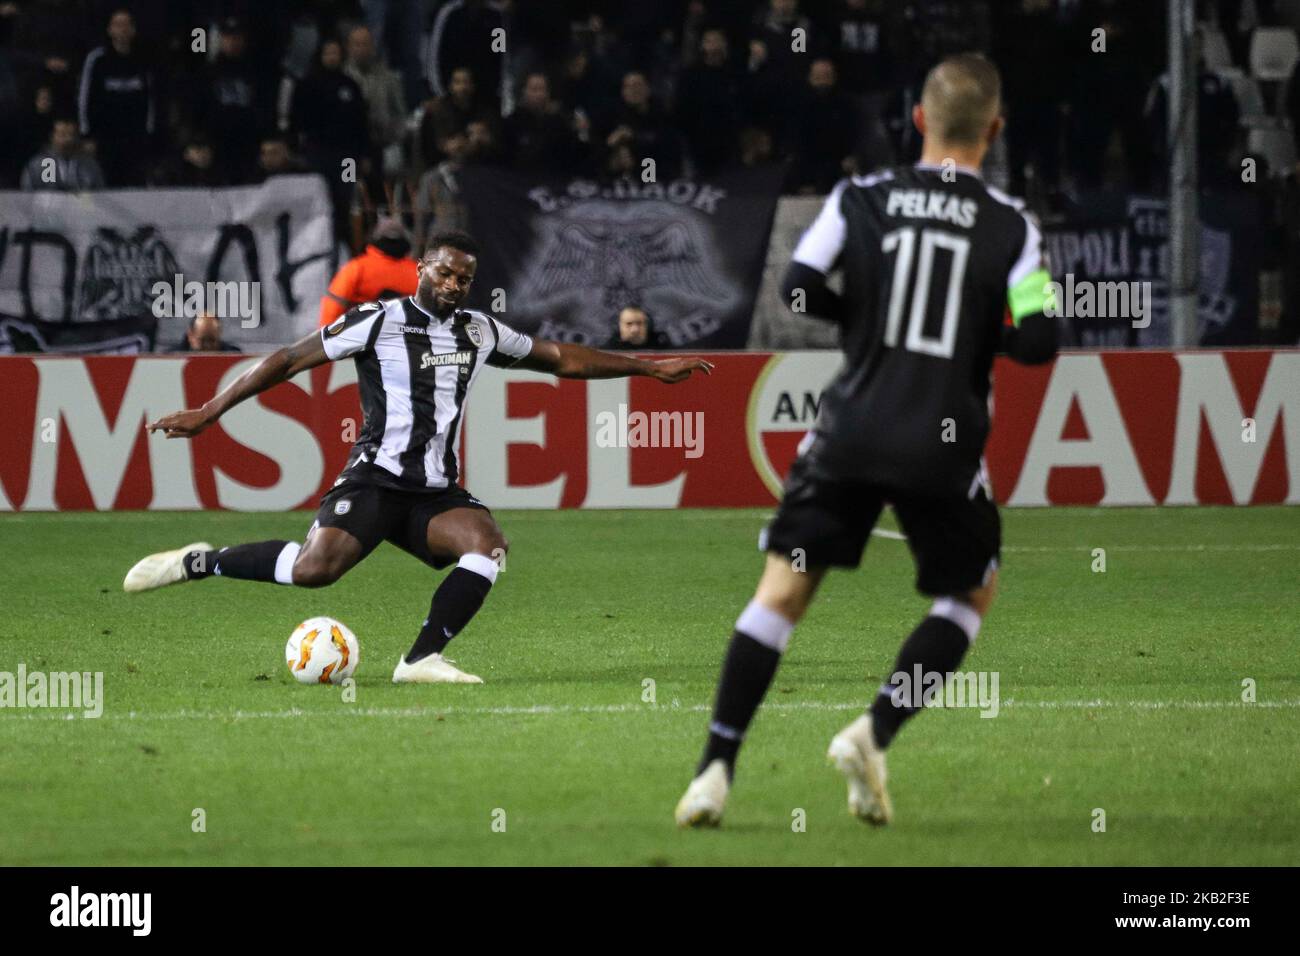 Fernando Varela or Fernando Lopes dos Santos Varela (PAOK). FC PAOK vs MOL Vidi FC 0-2 game at Toumba stadium in Thessaloniki, Greece for the UEFA Europa League Group L. Videon scored at 12' with Szabolcs Huszti and at 45' with Stopira. PAOK had the 74% Possession with 12 final shots, 0 yellow cards against Vidi with 5 final shots and 5 yellow cards. (Photo by Nicolas Economou/NurPhoto) Stock Photo